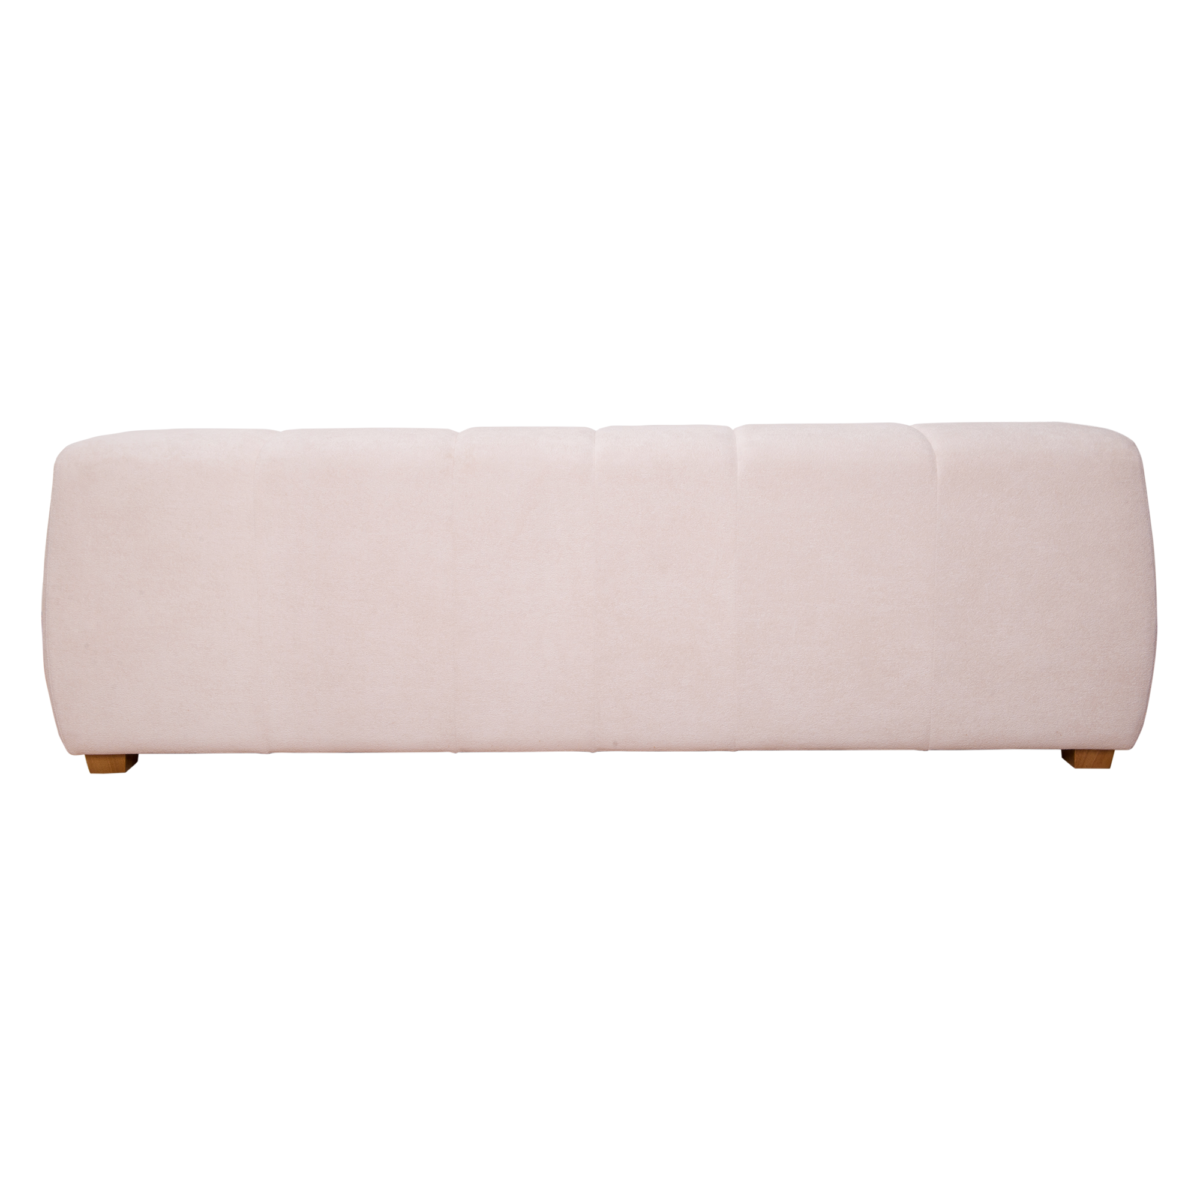 Lili-3-Seater-Upholstered-Sofa-CO058-3S-8